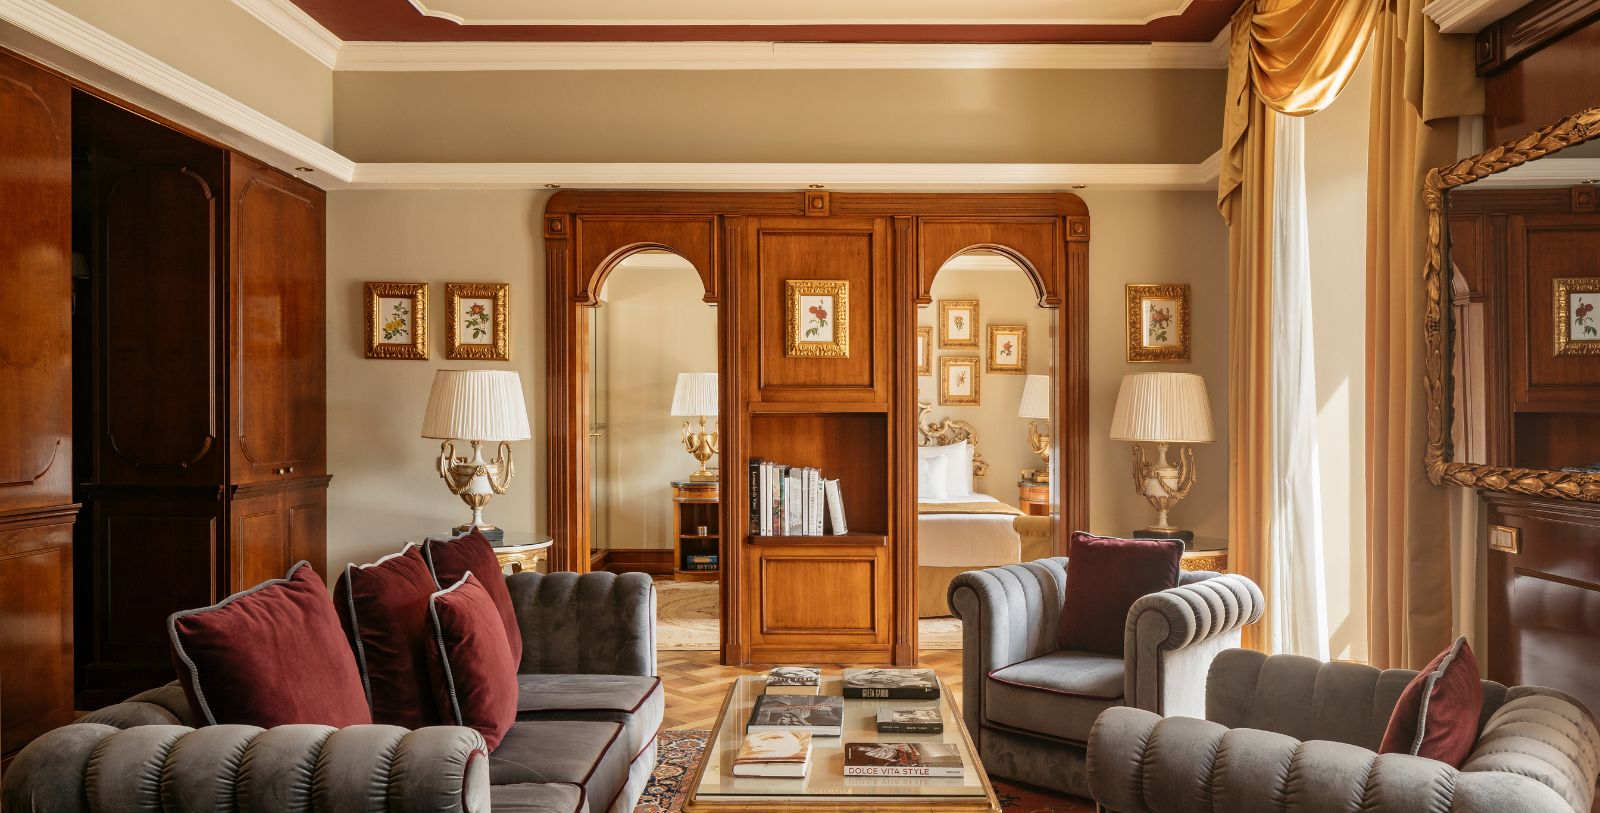 Discover the historic accommodations at the Grand Hotel Tremezzo.